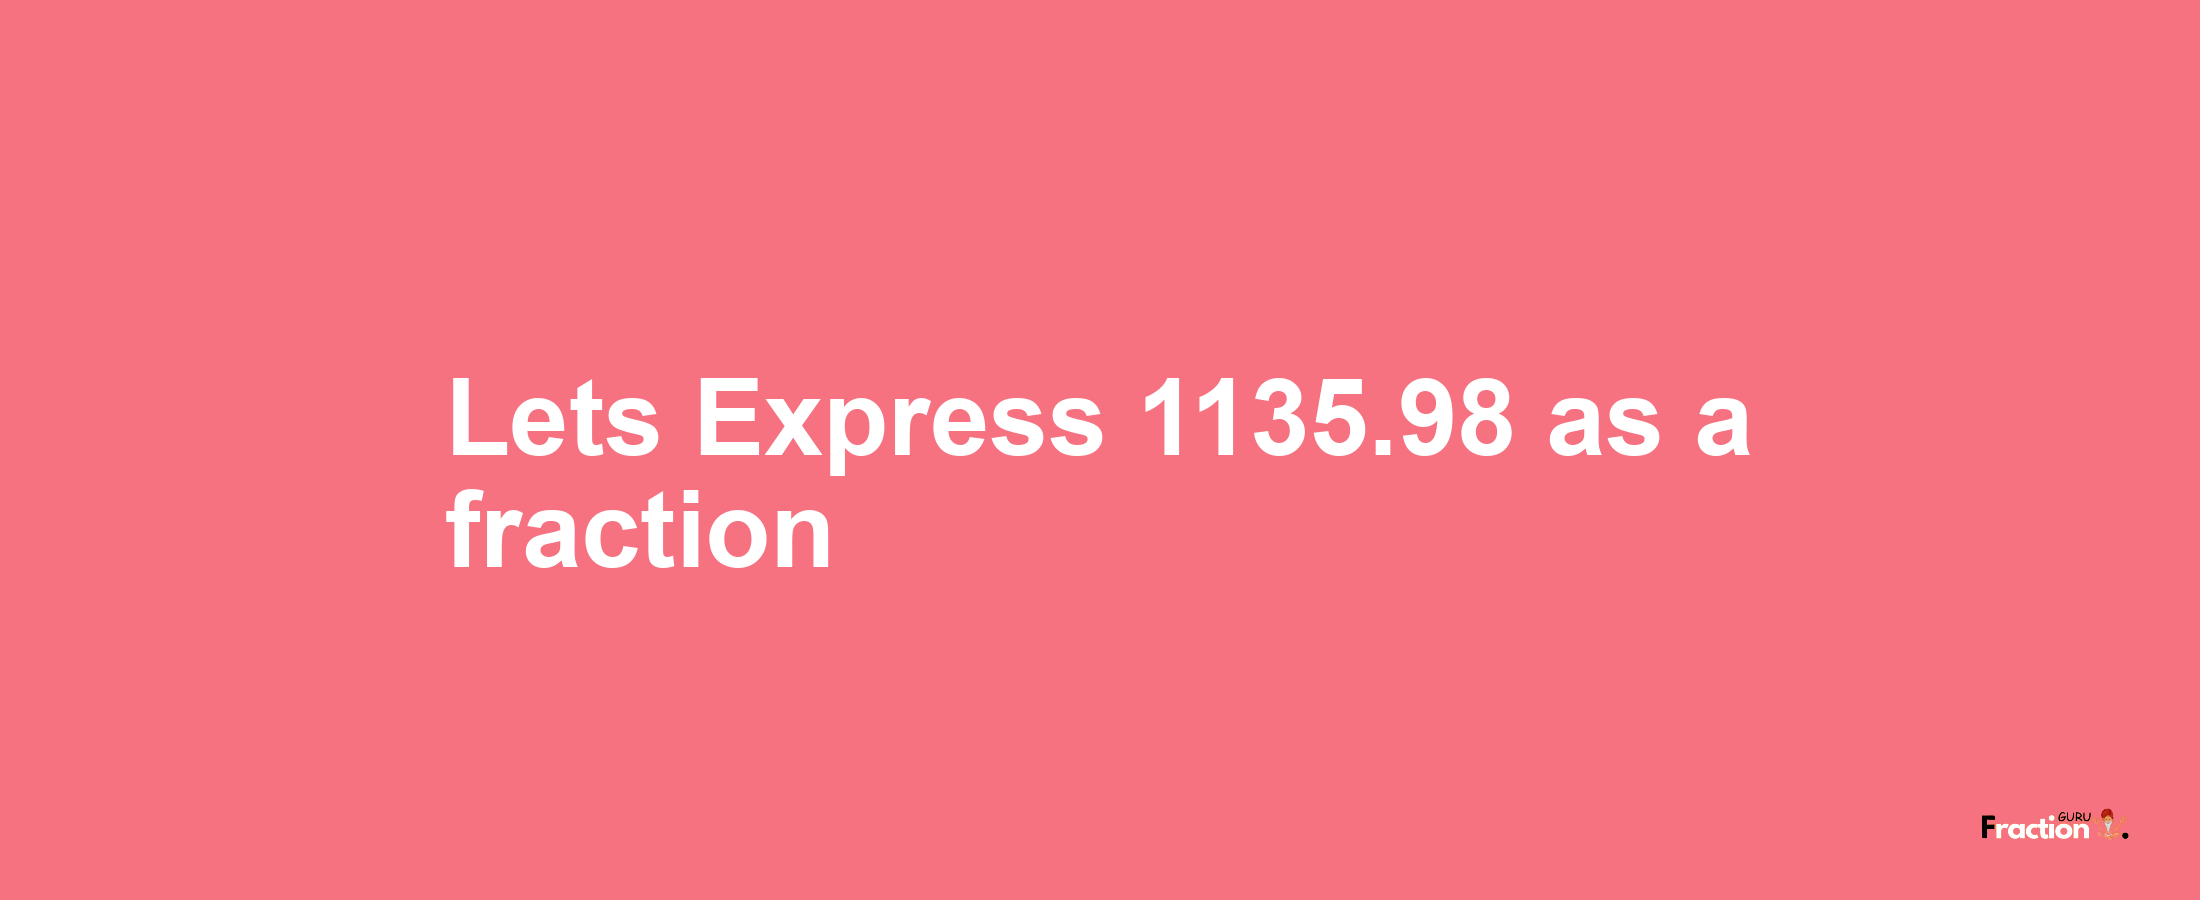 Lets Express 1135.98 as afraction